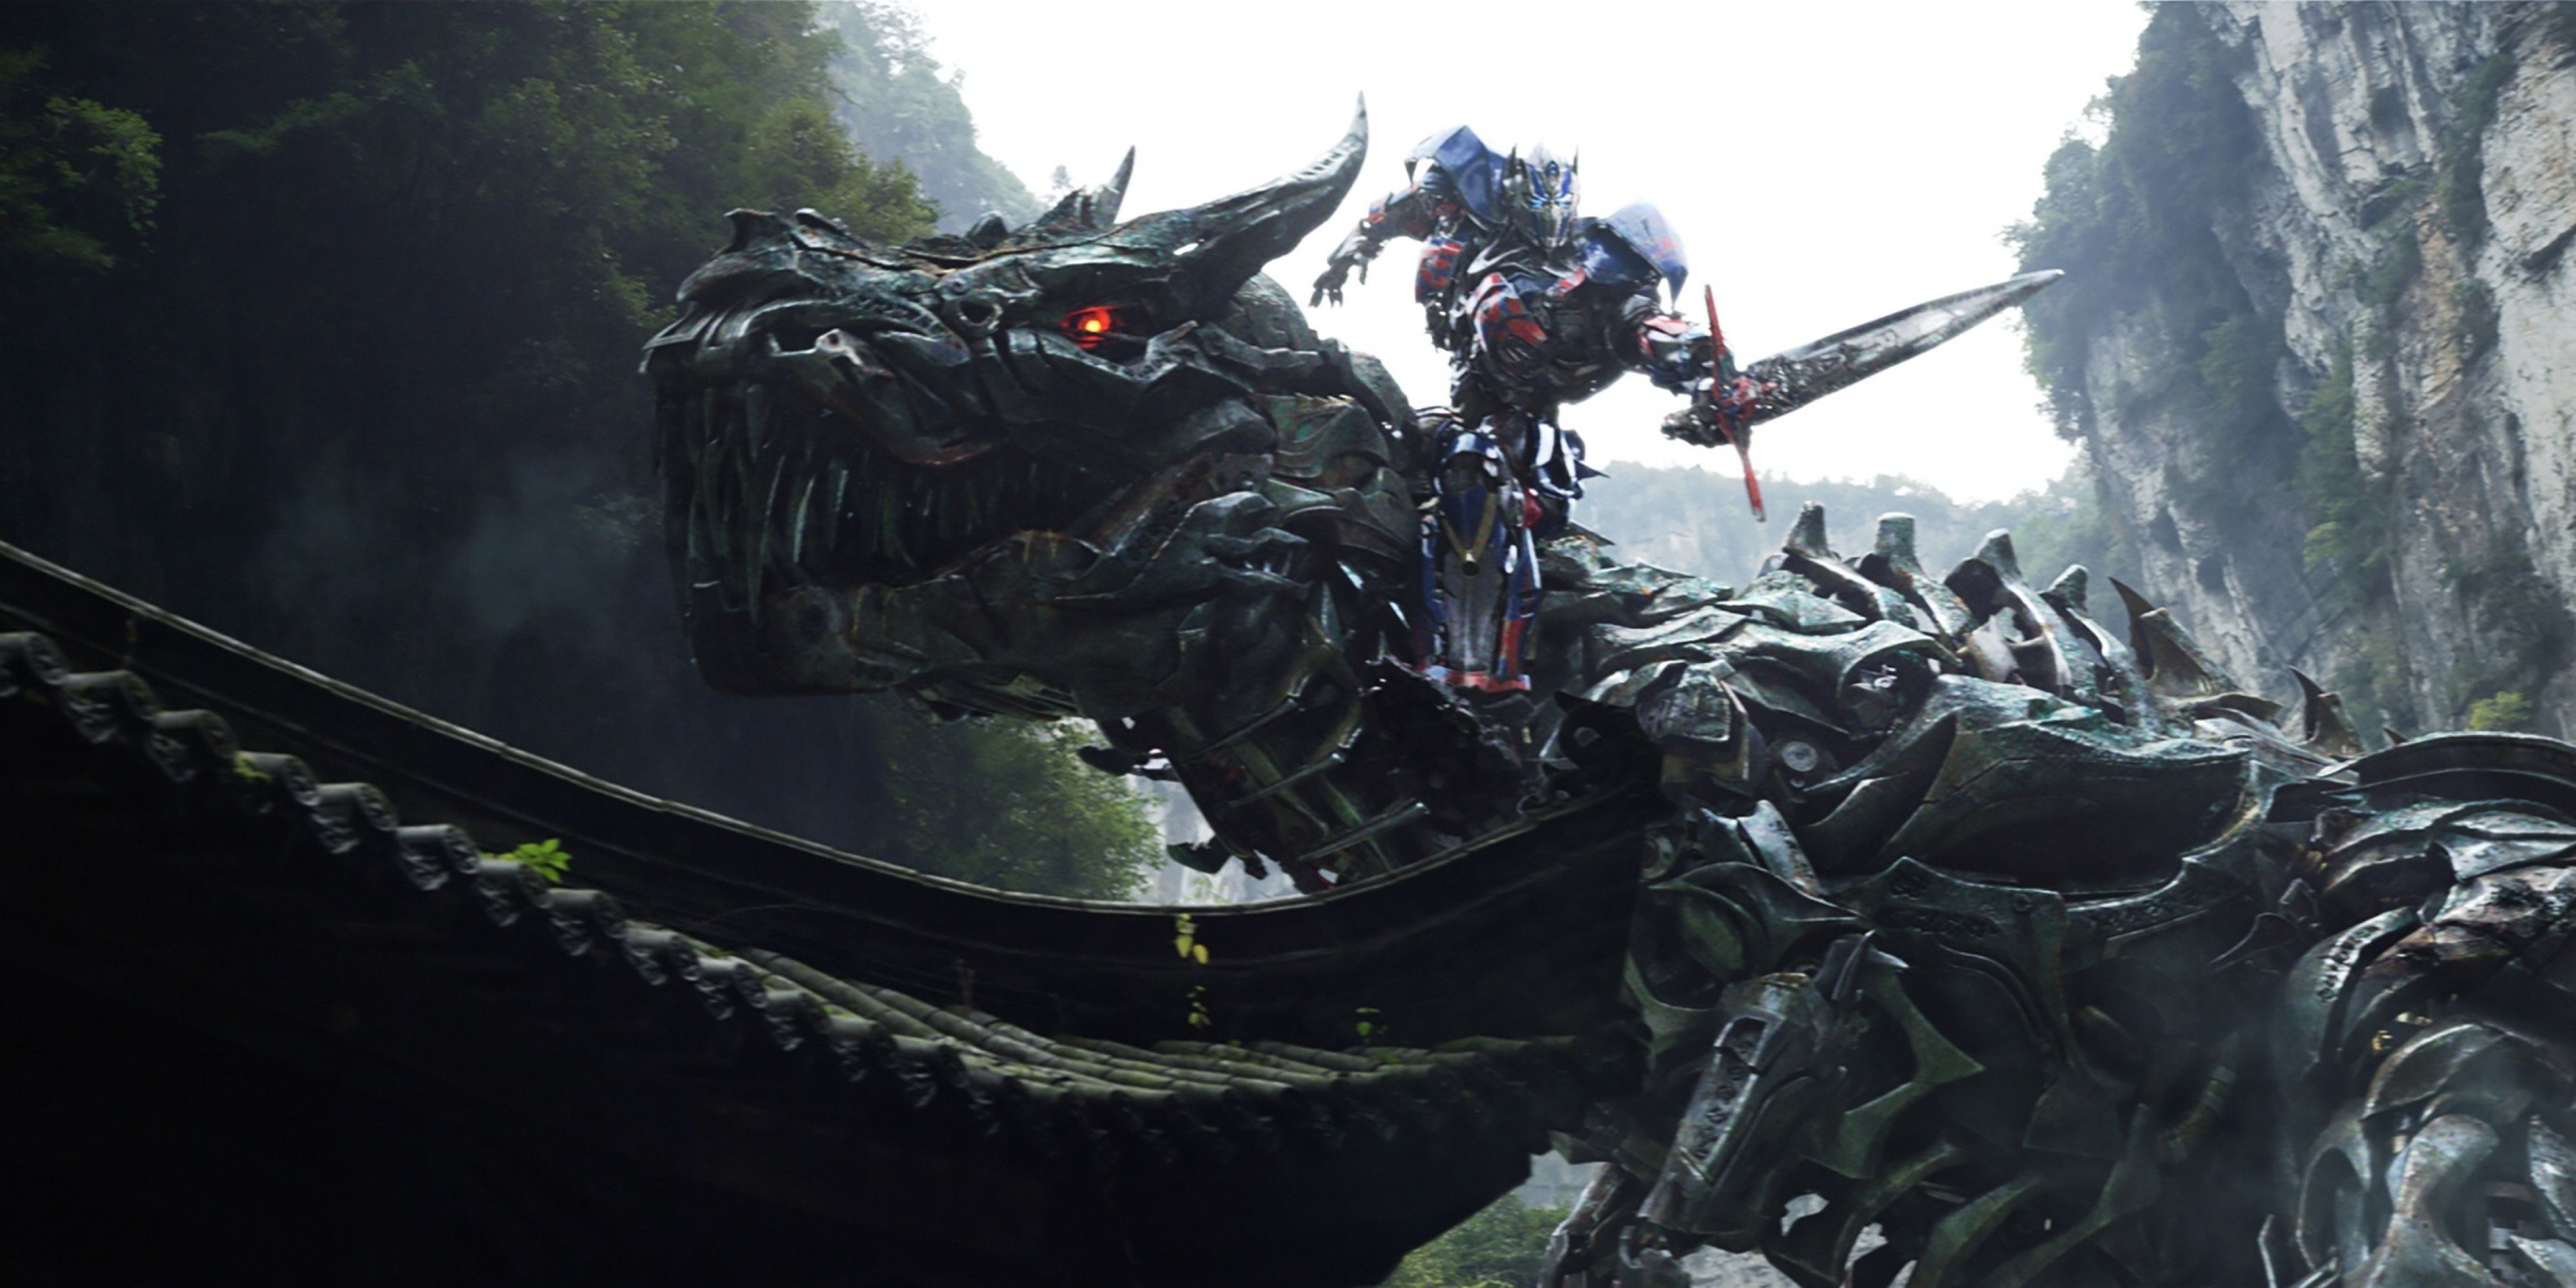 Optimus Prime and Grimlock from Transformers 4